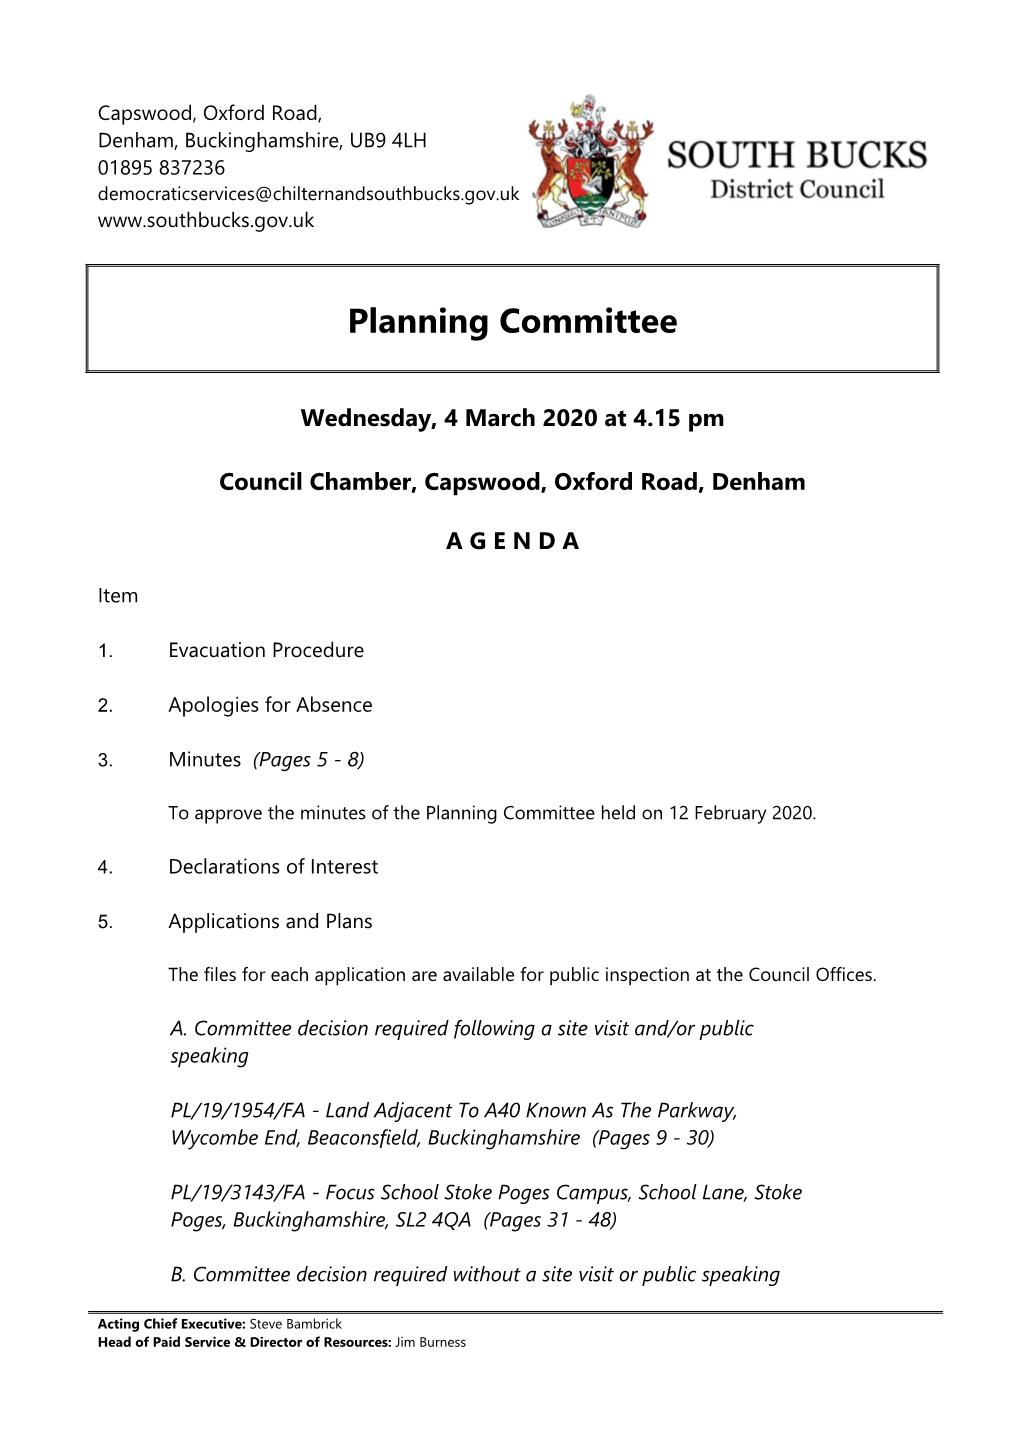 Agenda Document for Planning Committee, 04/03/2020 16:15